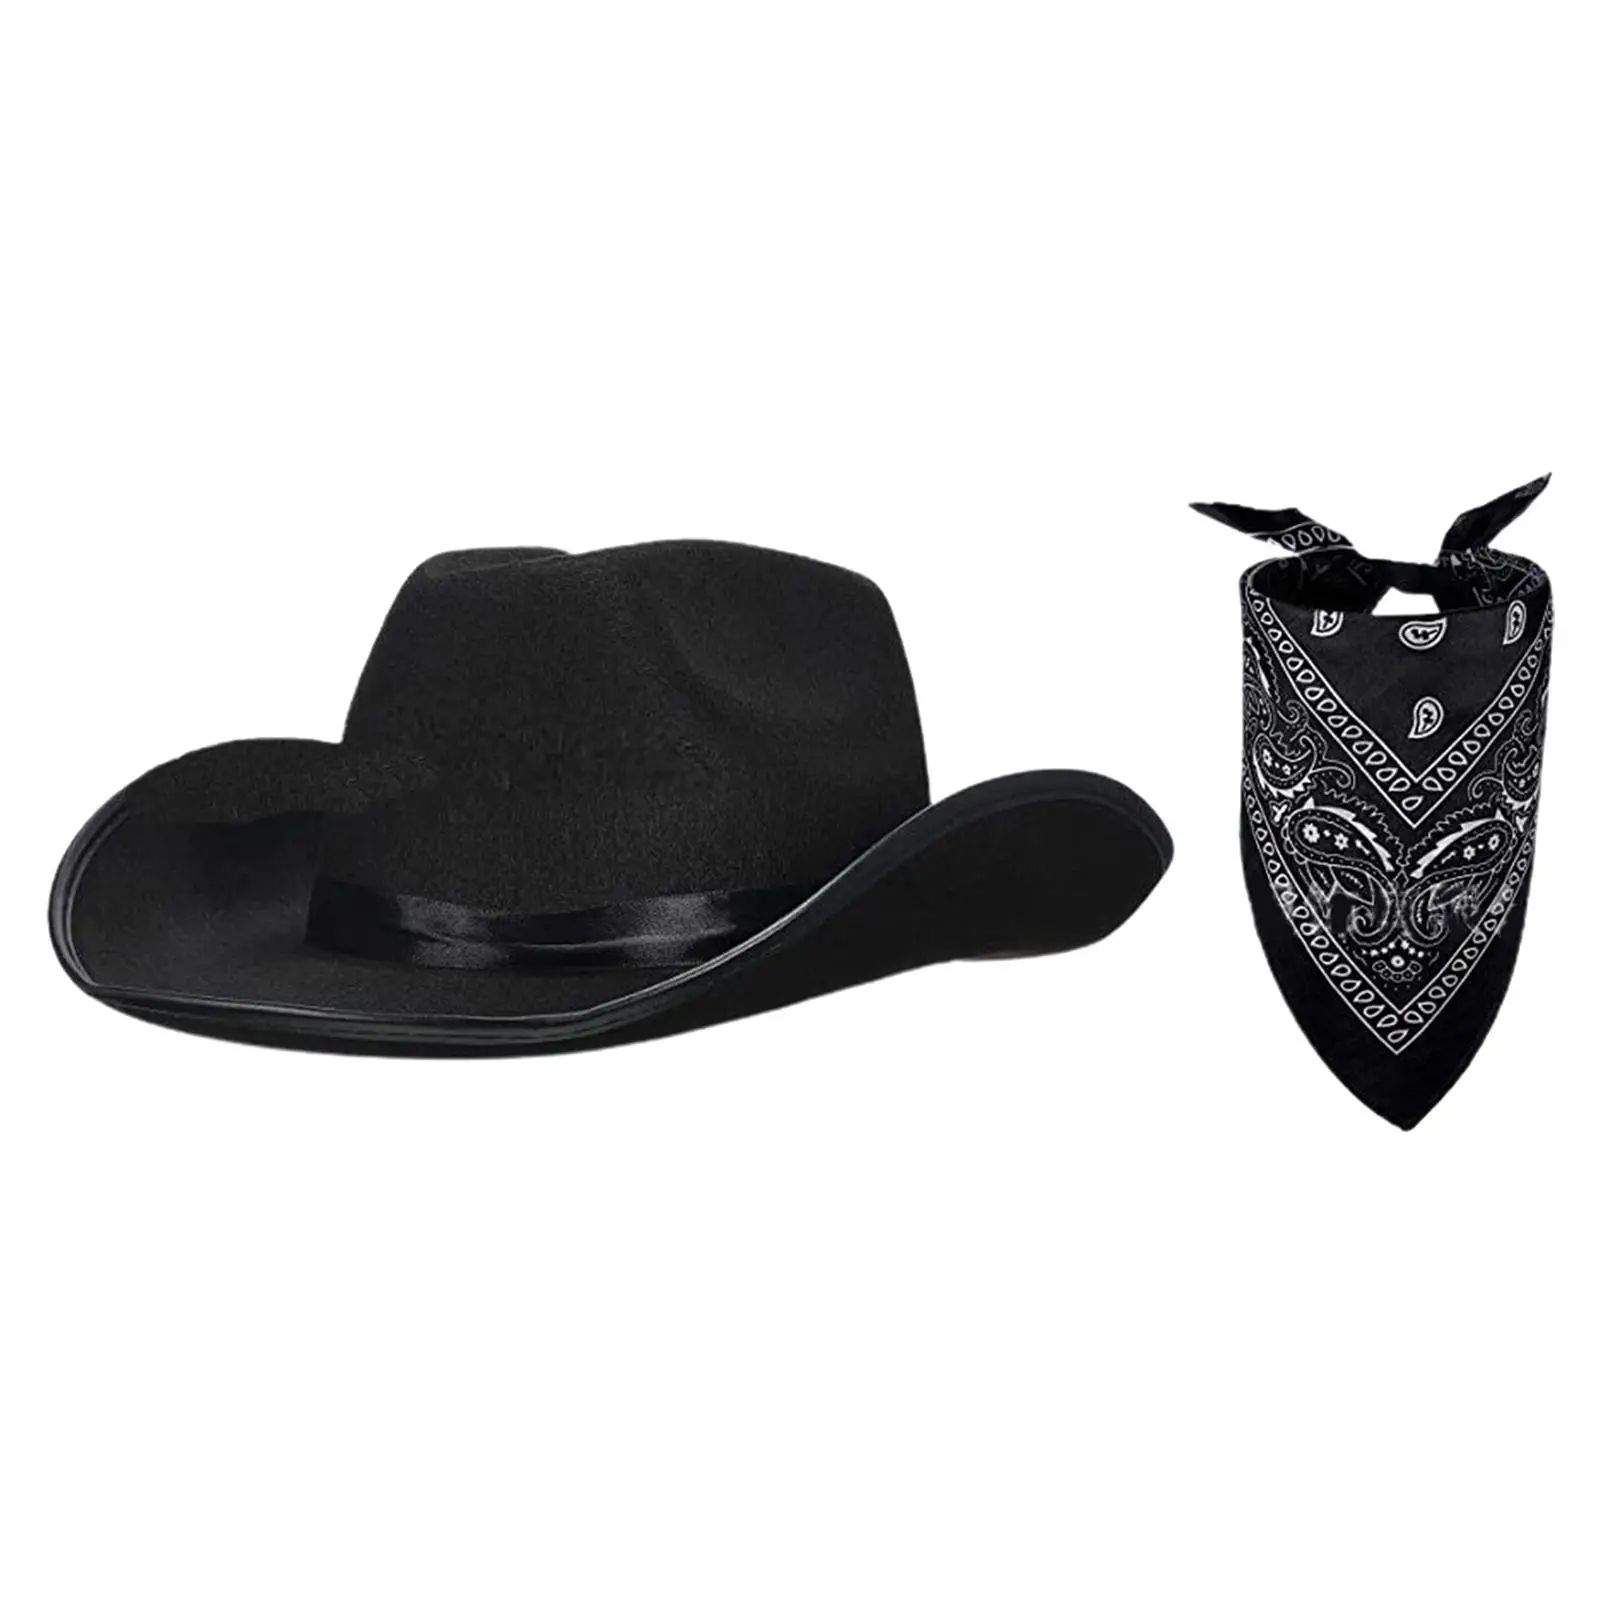 Cowboy Hat and Bandanna Head Wrap Scarf for Men Women Halloween Cosplay